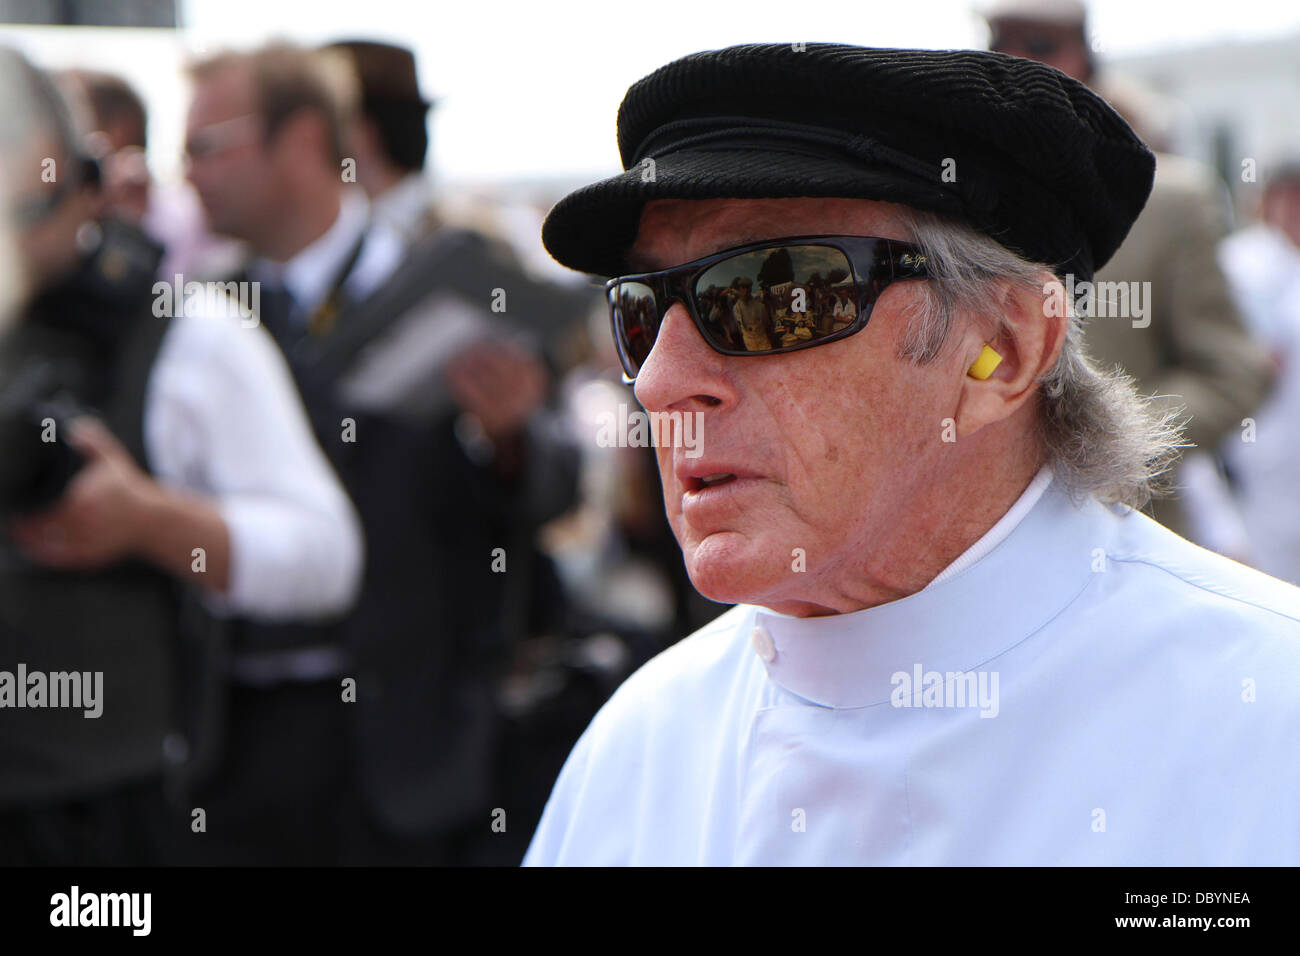 Jackie Stewart Goodwood Revival at the Goodwood Estate in Chichester West Sussex, England - 16.09.11 Credit Mandatory: WENN.com Stock Photo